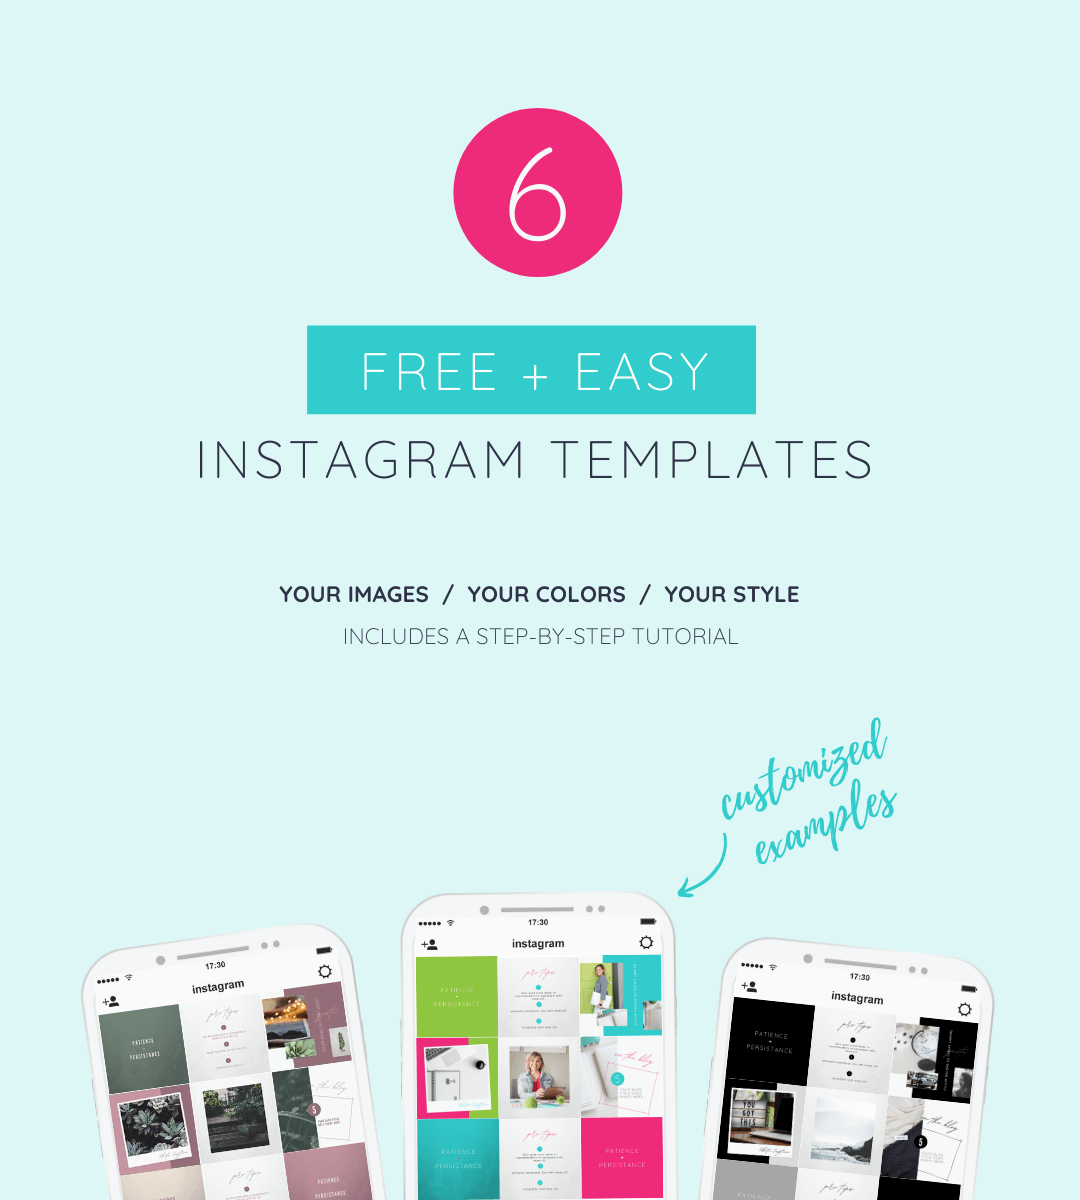 There are six free and easy instagram templates.